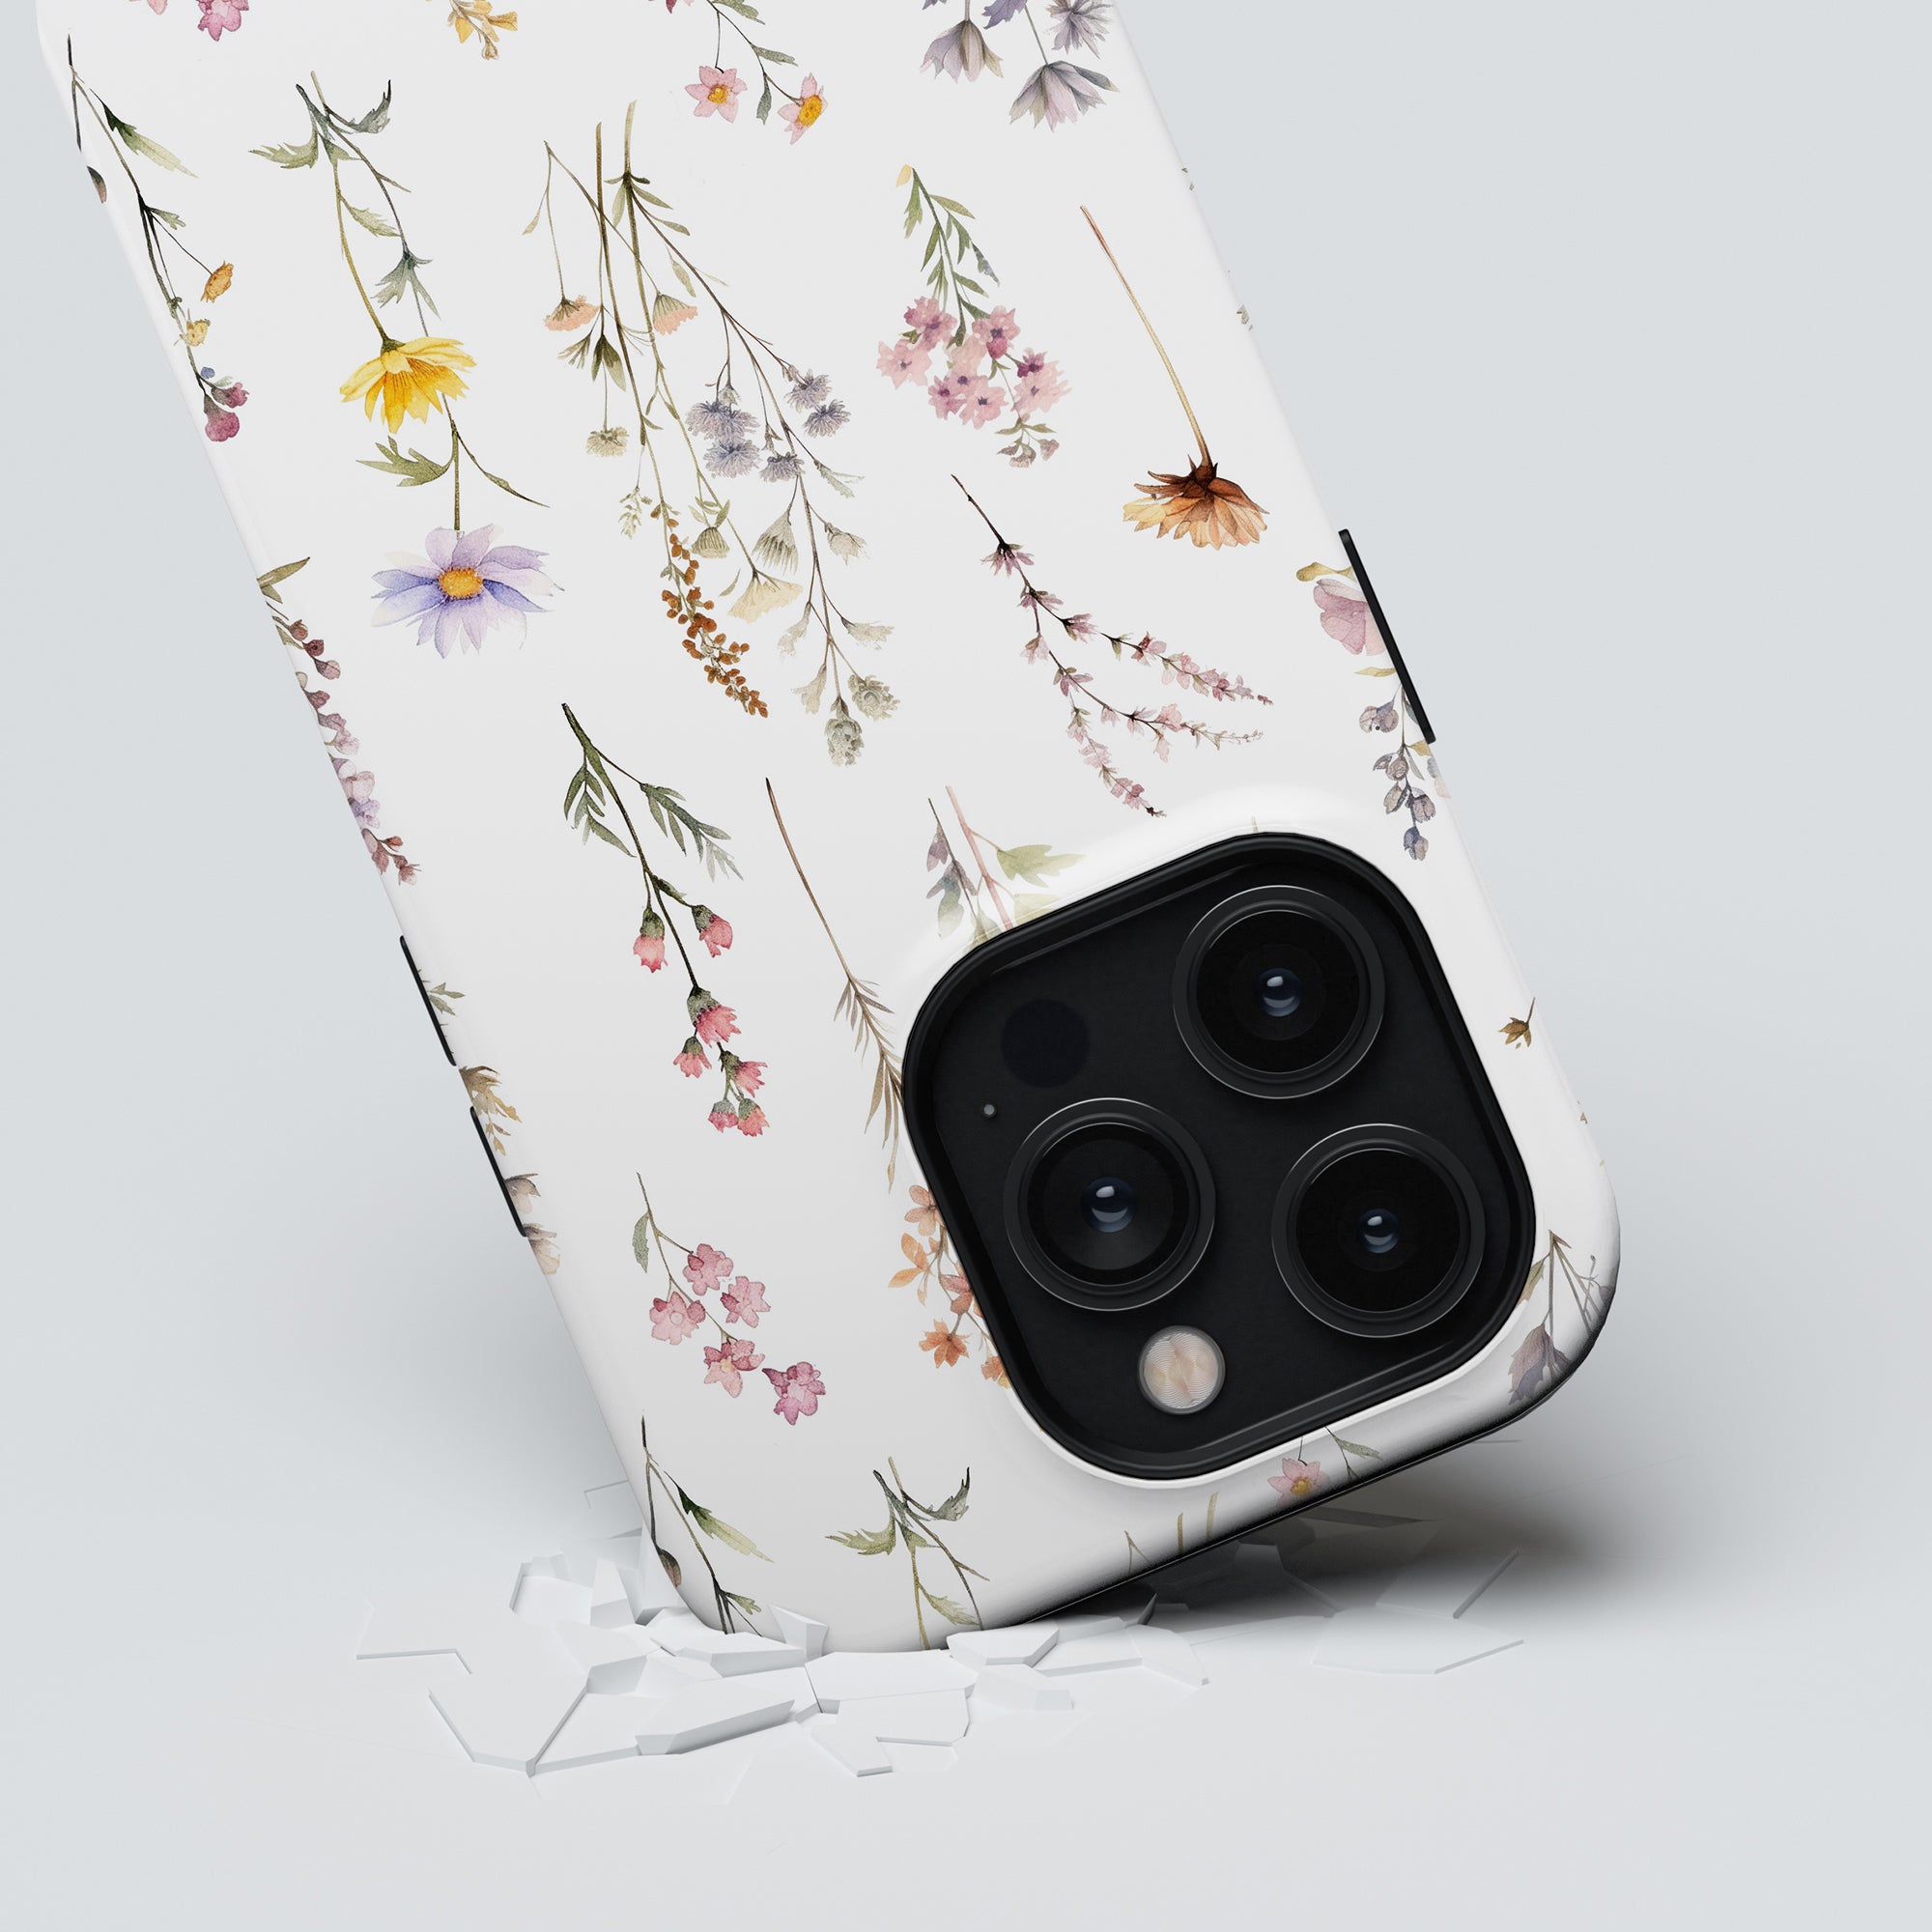 A Wild Flowers - Tough Case smartphone emerging through a cracked surface.